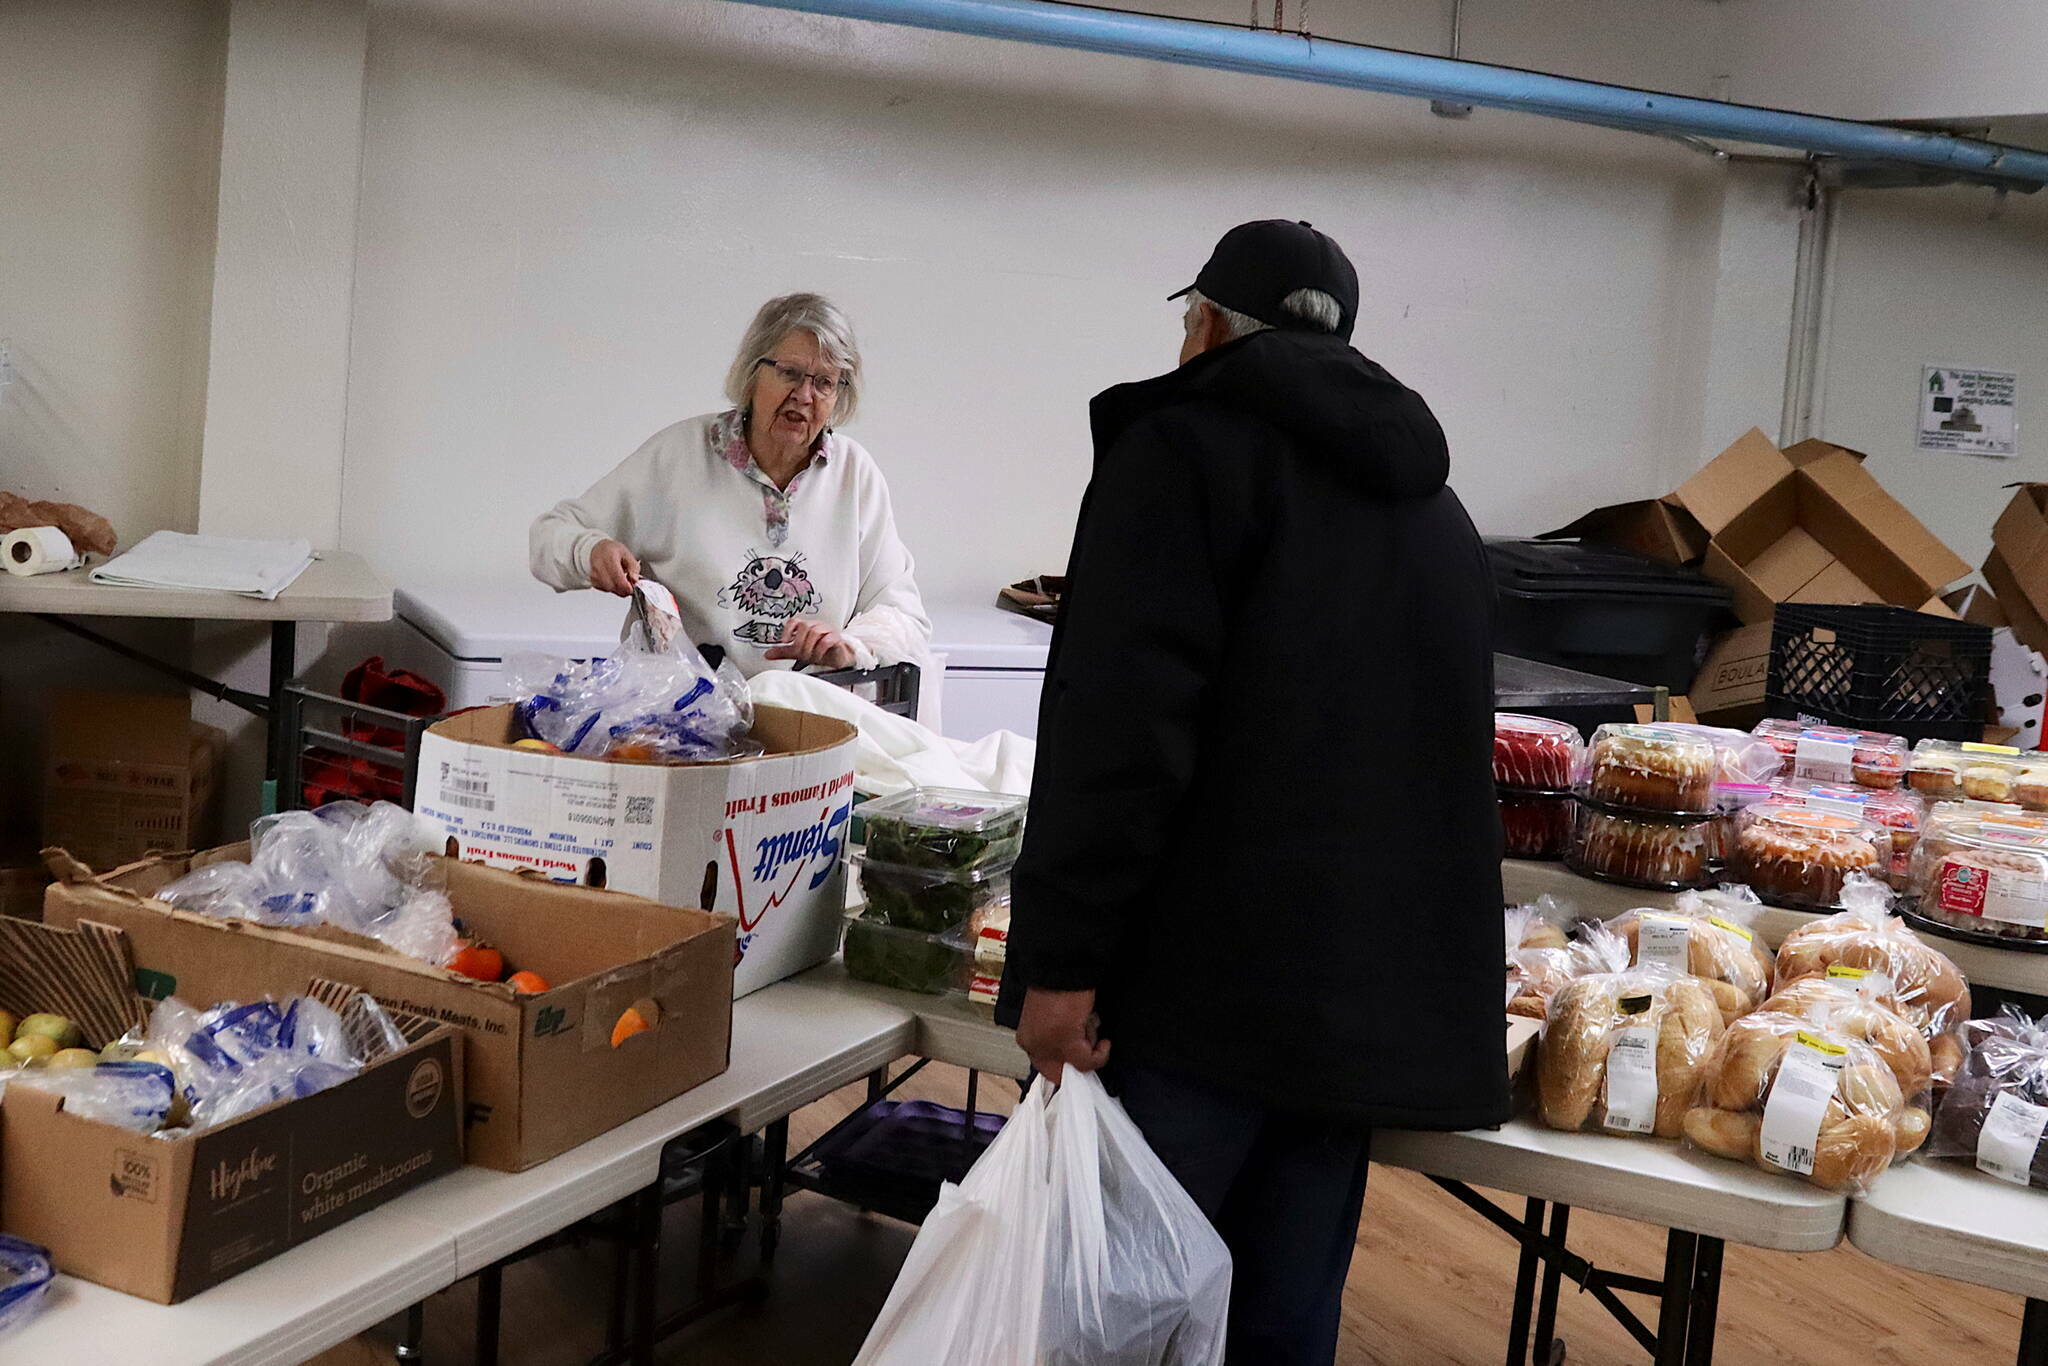 Sylvia Geraghty helps a customer during the weekly food pantry at Resurrection Lutheran Church on Tuesday, Dec. 6. (Mark Sabbatini / Juneau Empire file photo)